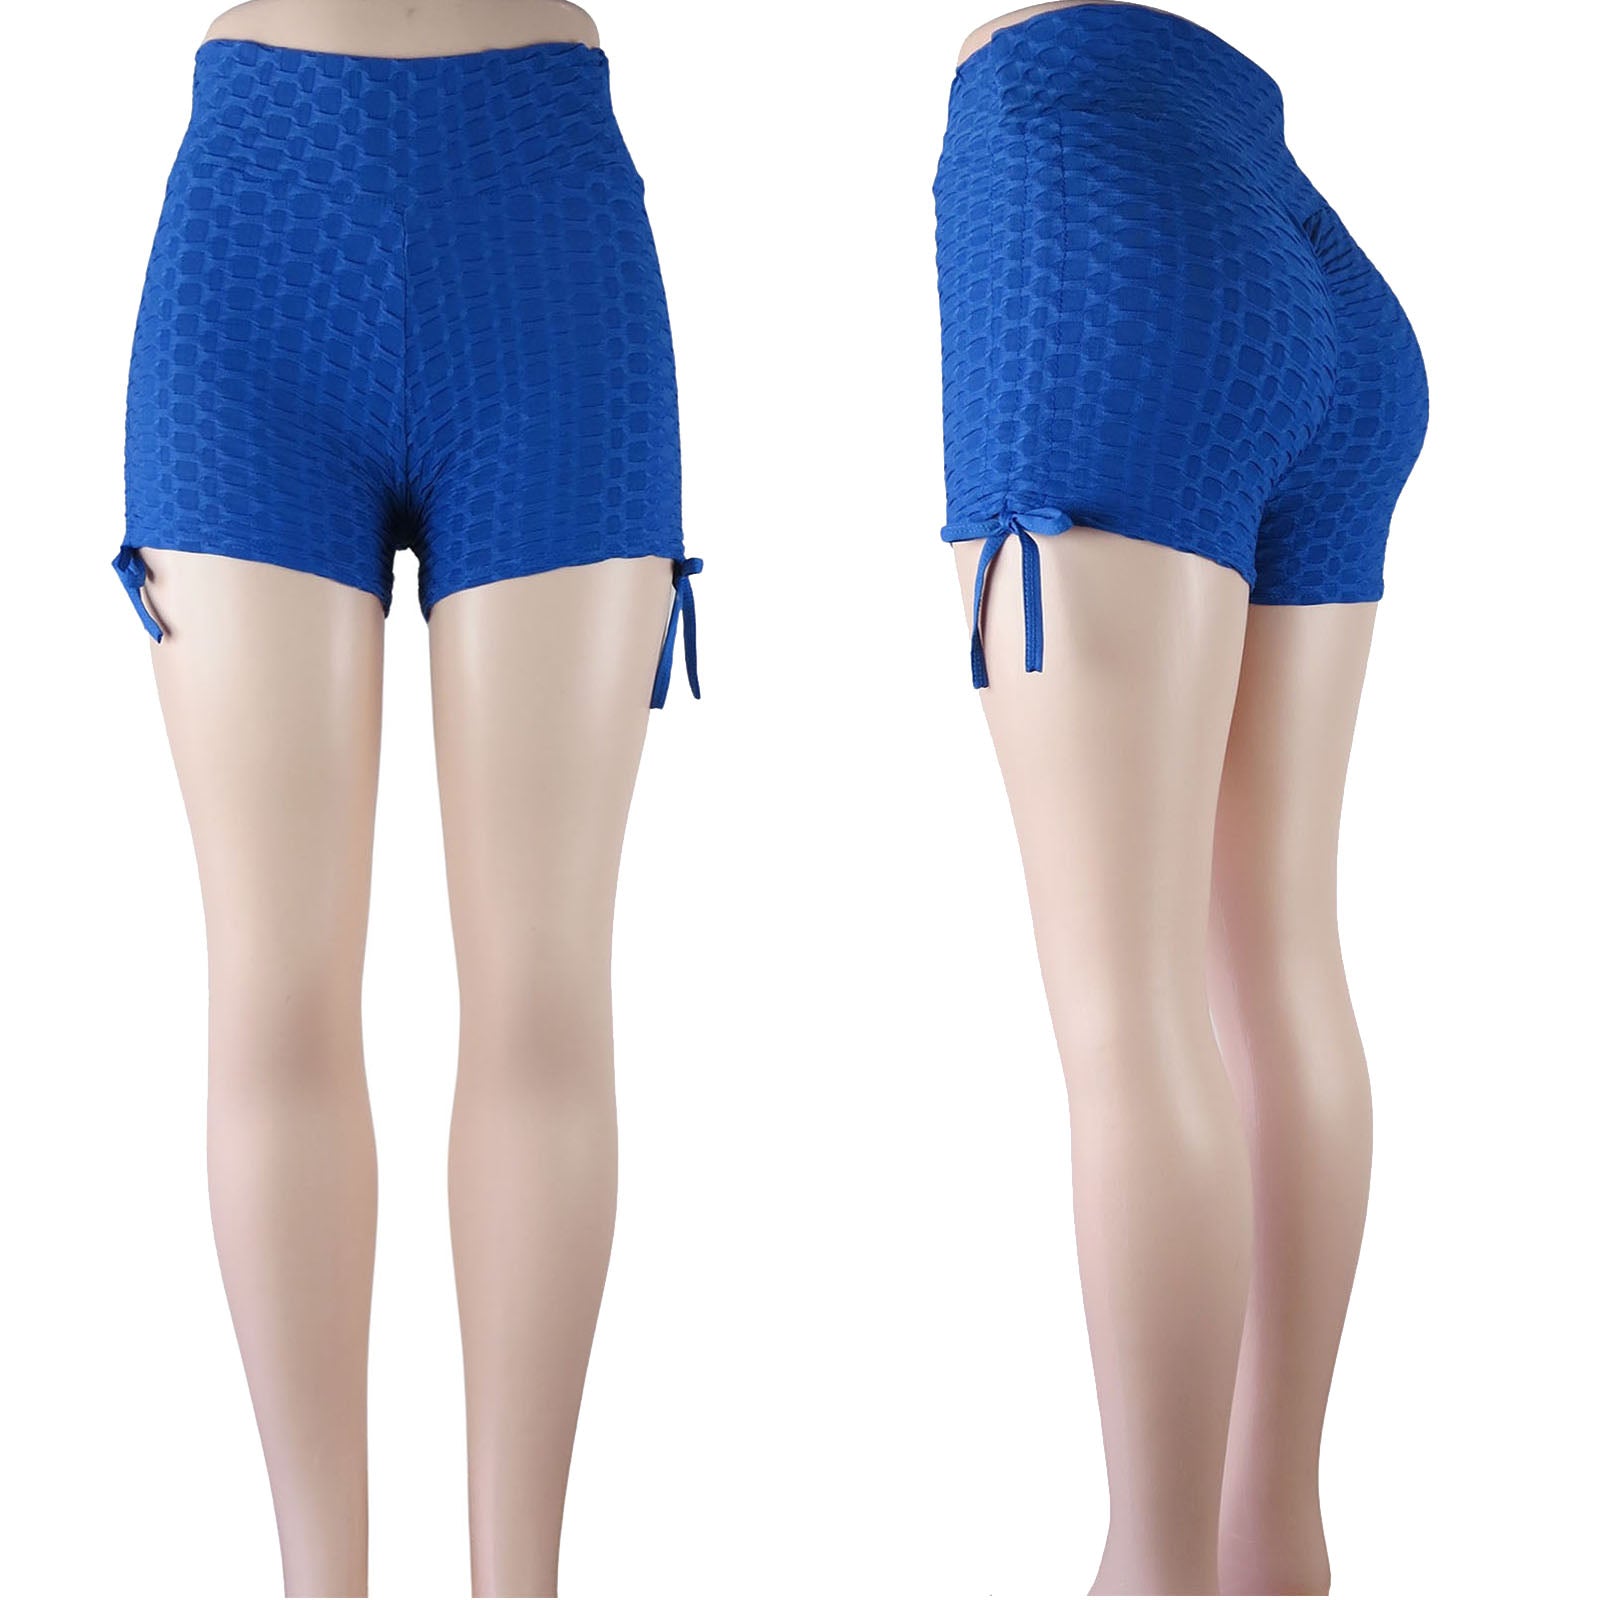 ITEM NUMBER: AP766A-BOOTY (24 PIECE PACK WAS $5.00 - CLEARANCE SALE JUST  $1.50 / PIECE) TIK TOK BOOTY SHORTS HIGH WAIST